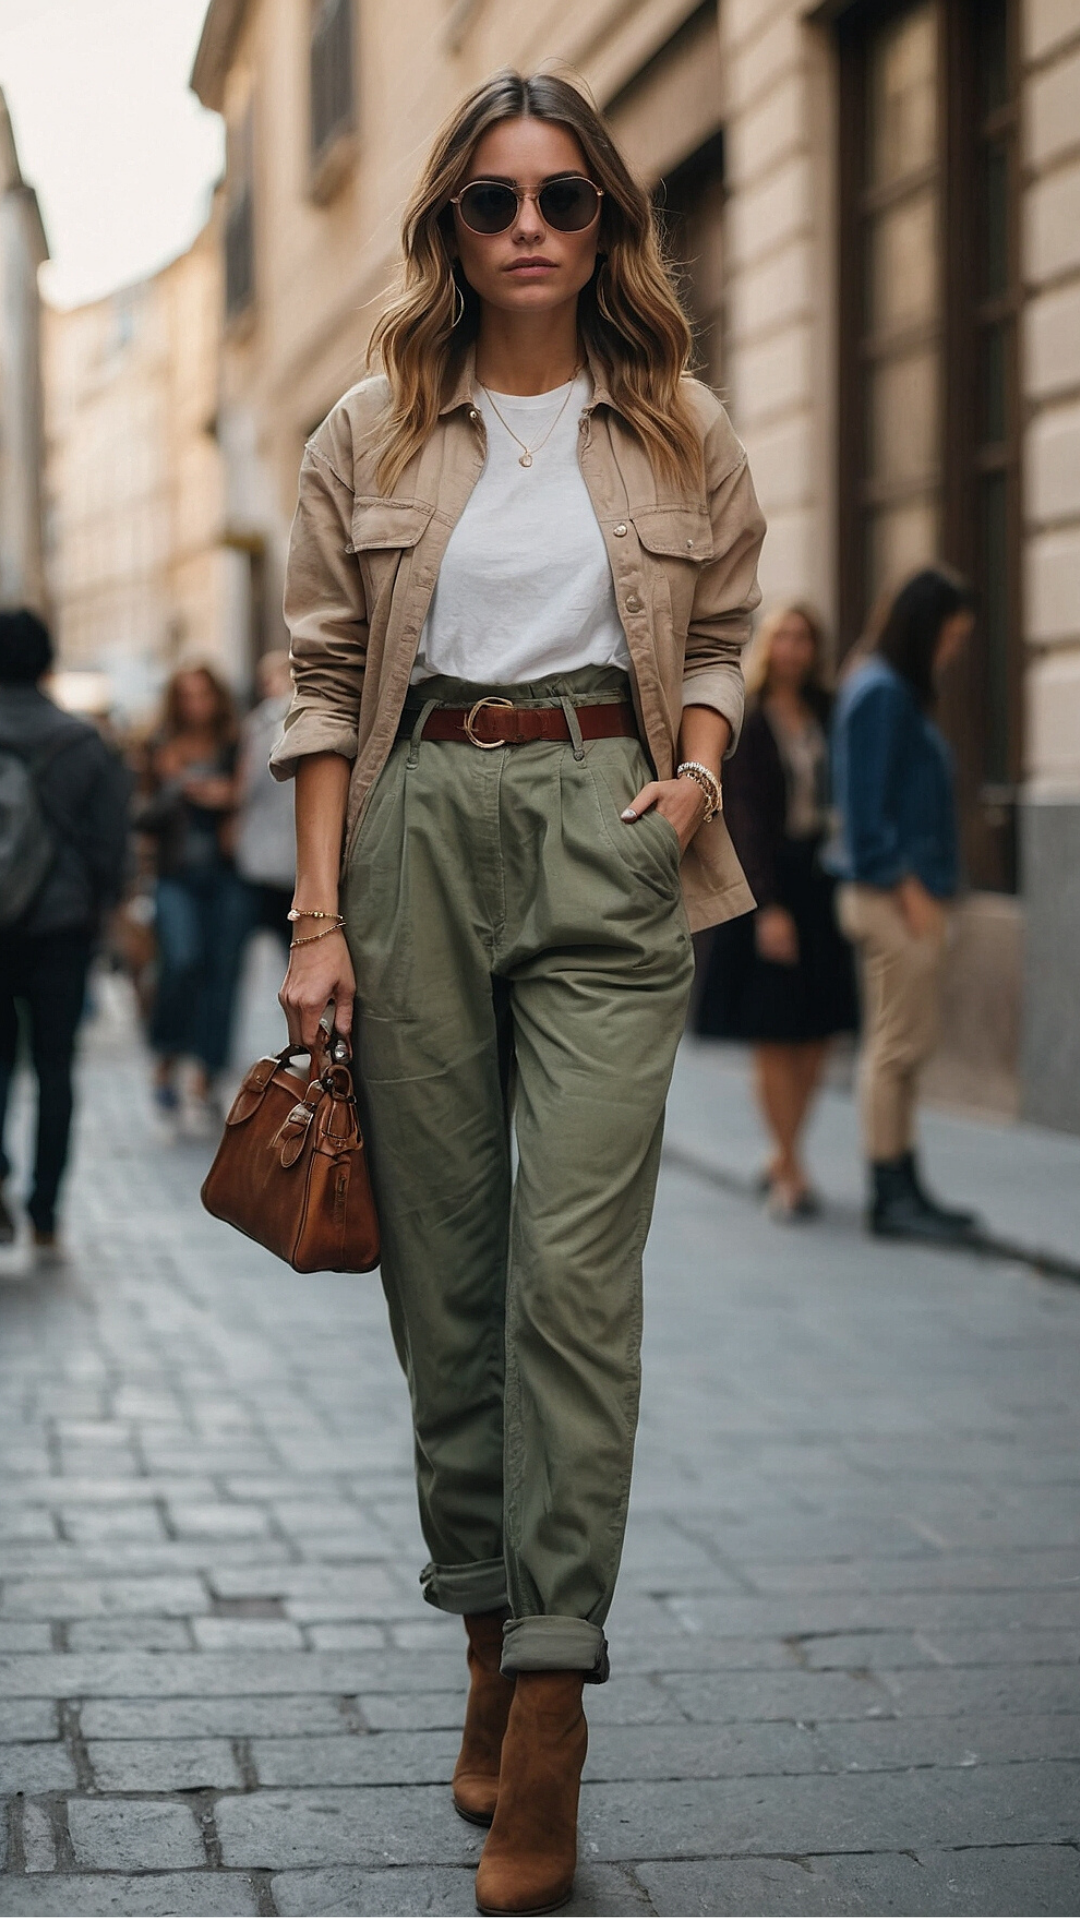 Casual Chic: Women's Comfortable Street Style Looks